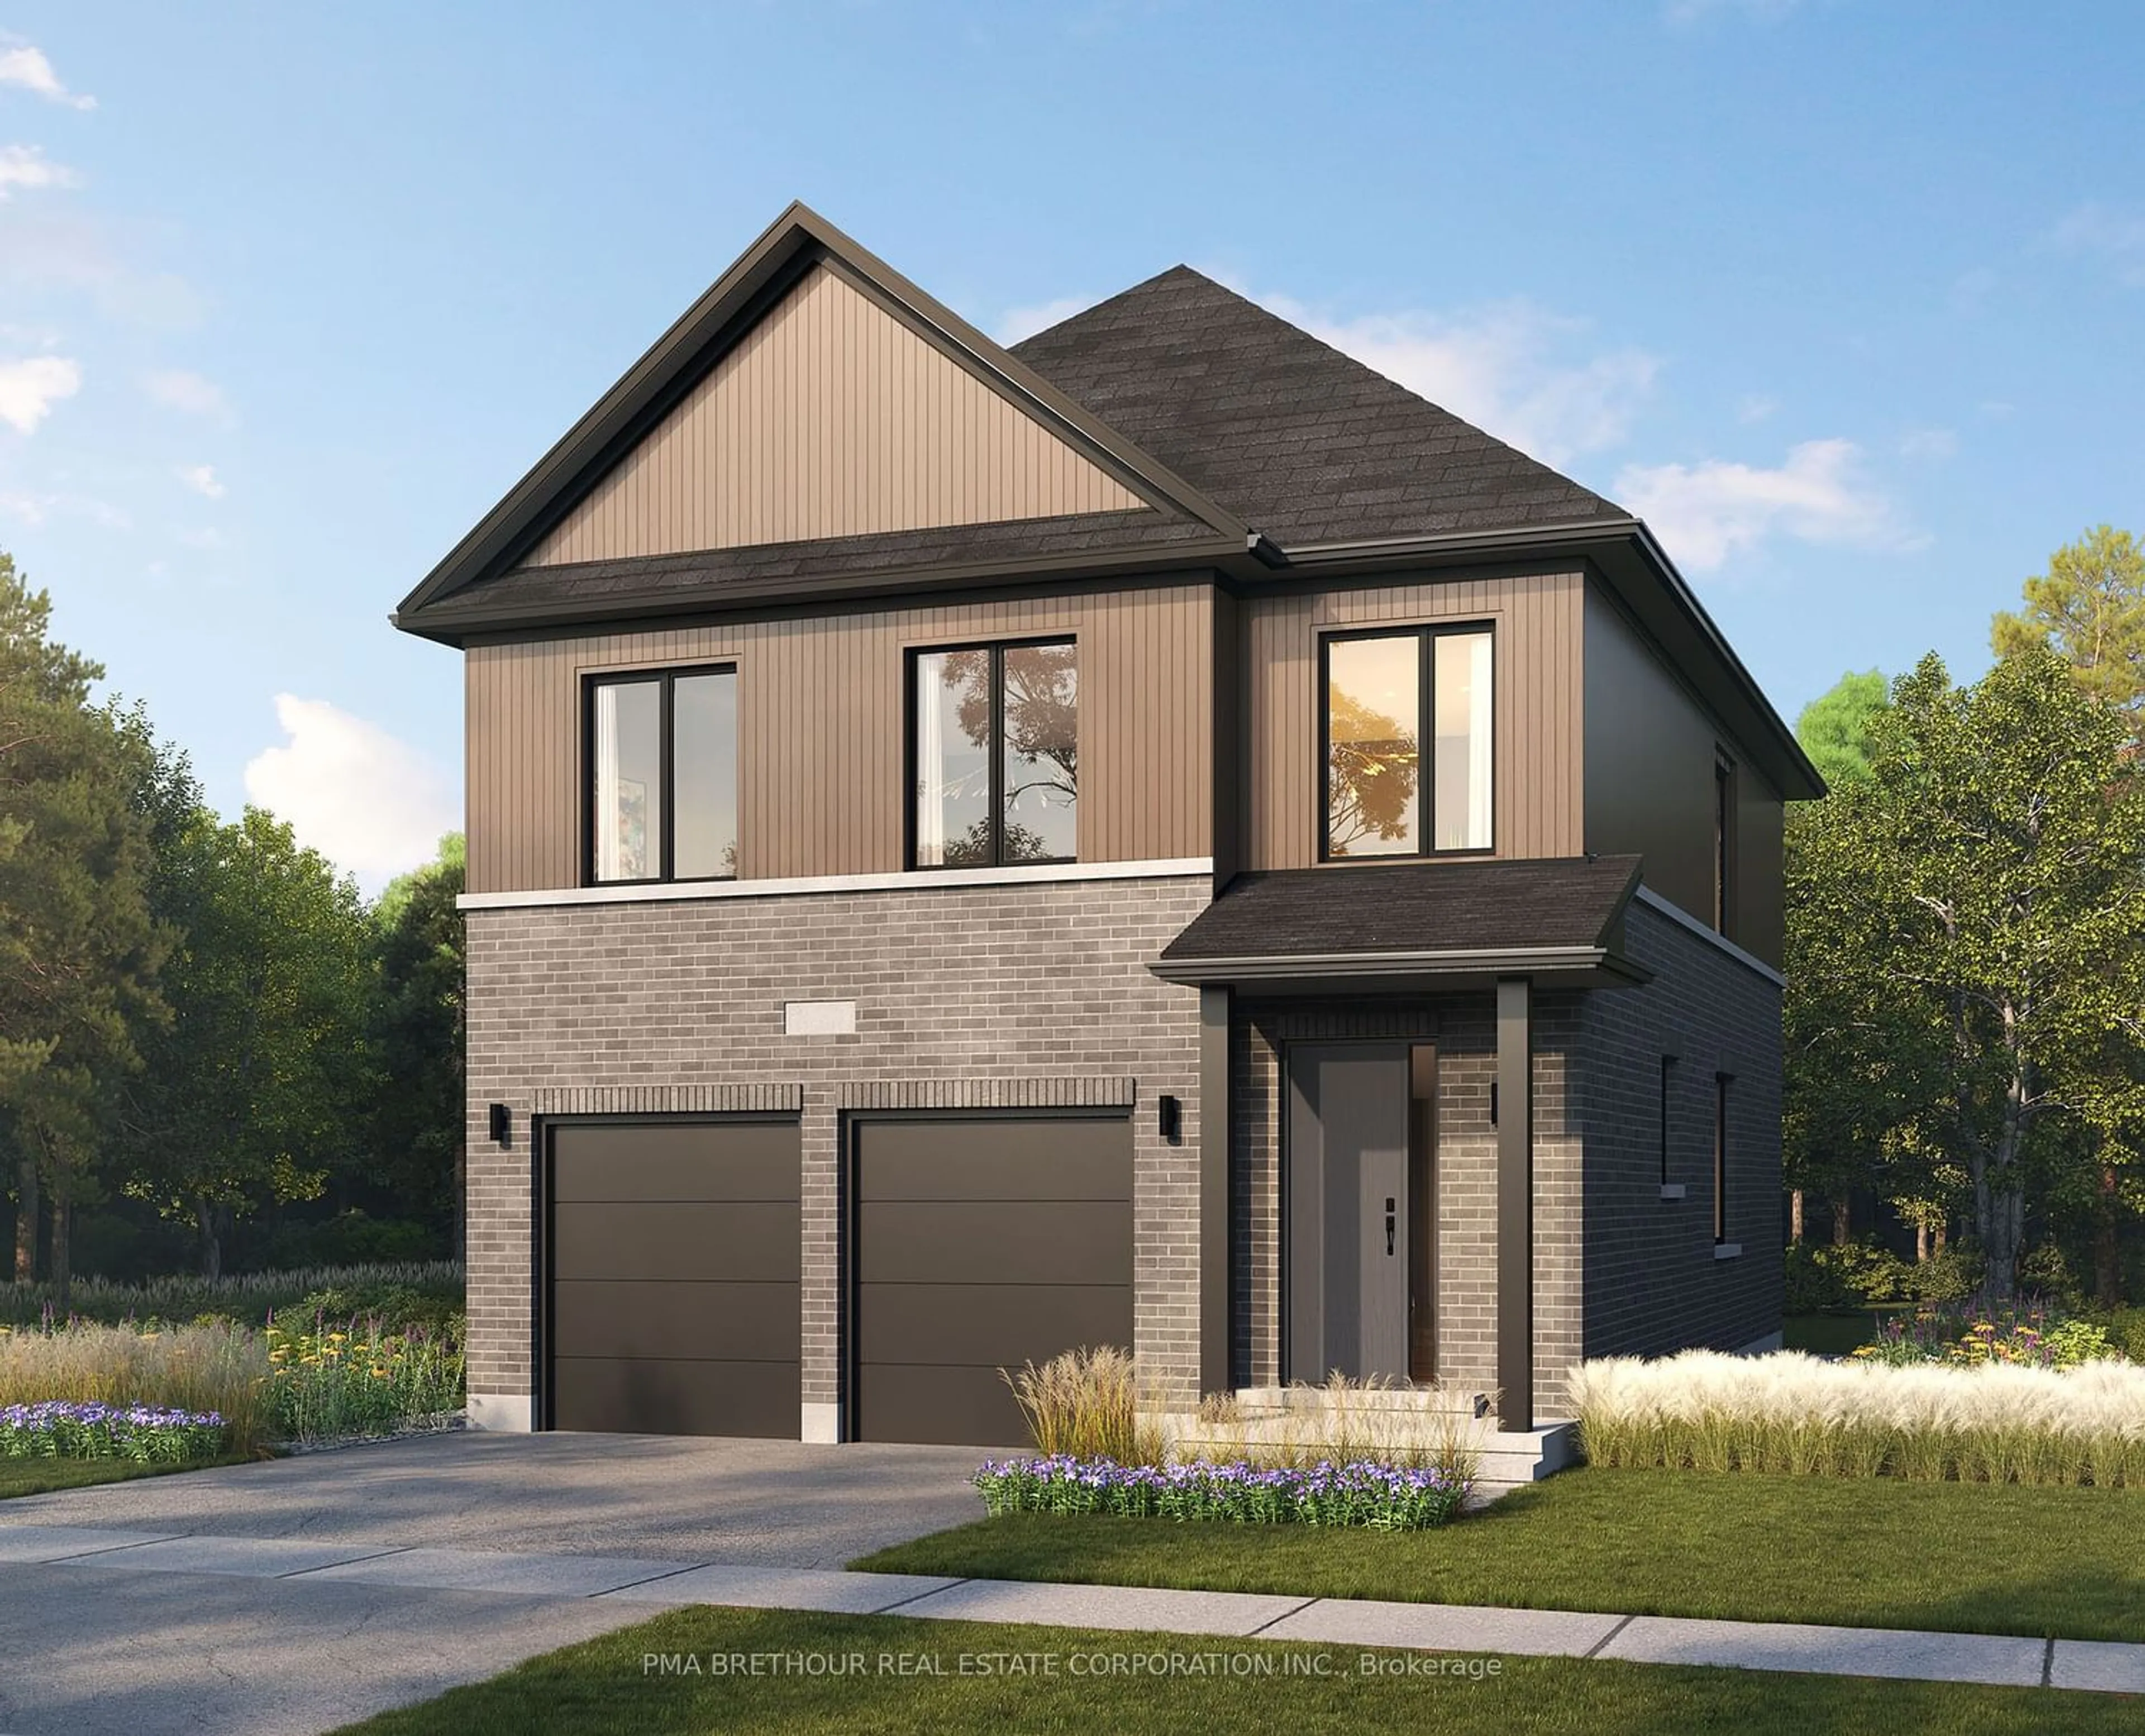 Home with brick exterior material for Lot 8 Robert Attersley Dr, Whitby Ontario L1R 0B6